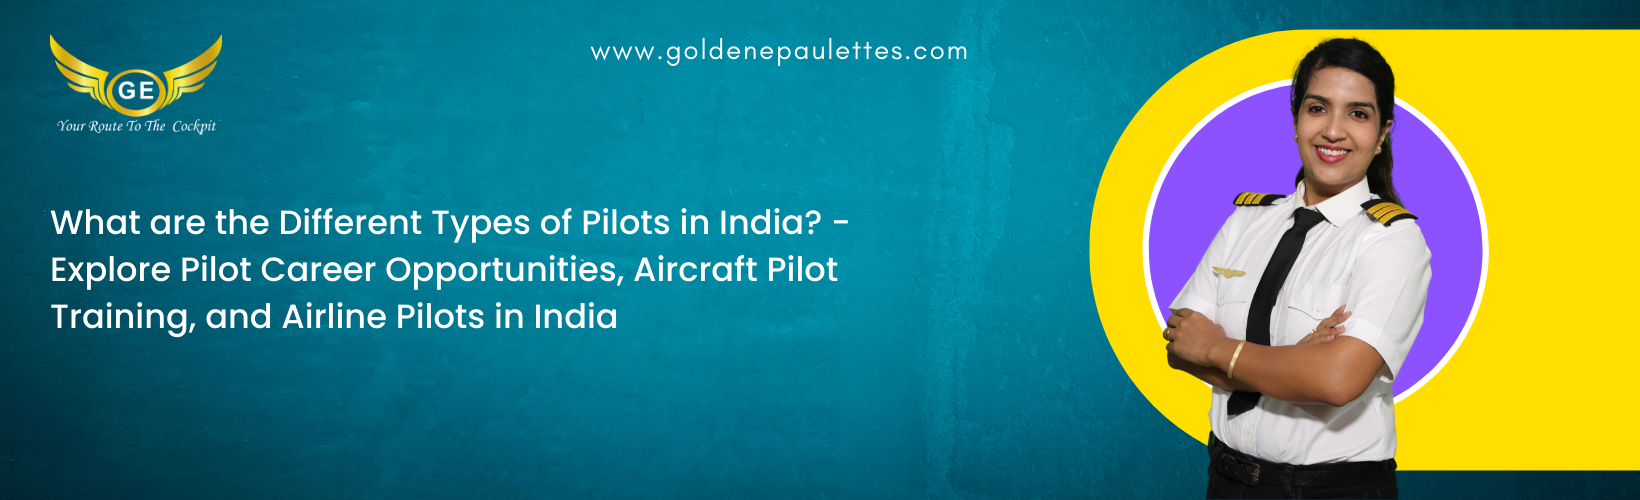 What are the Different Types of Pilots in India